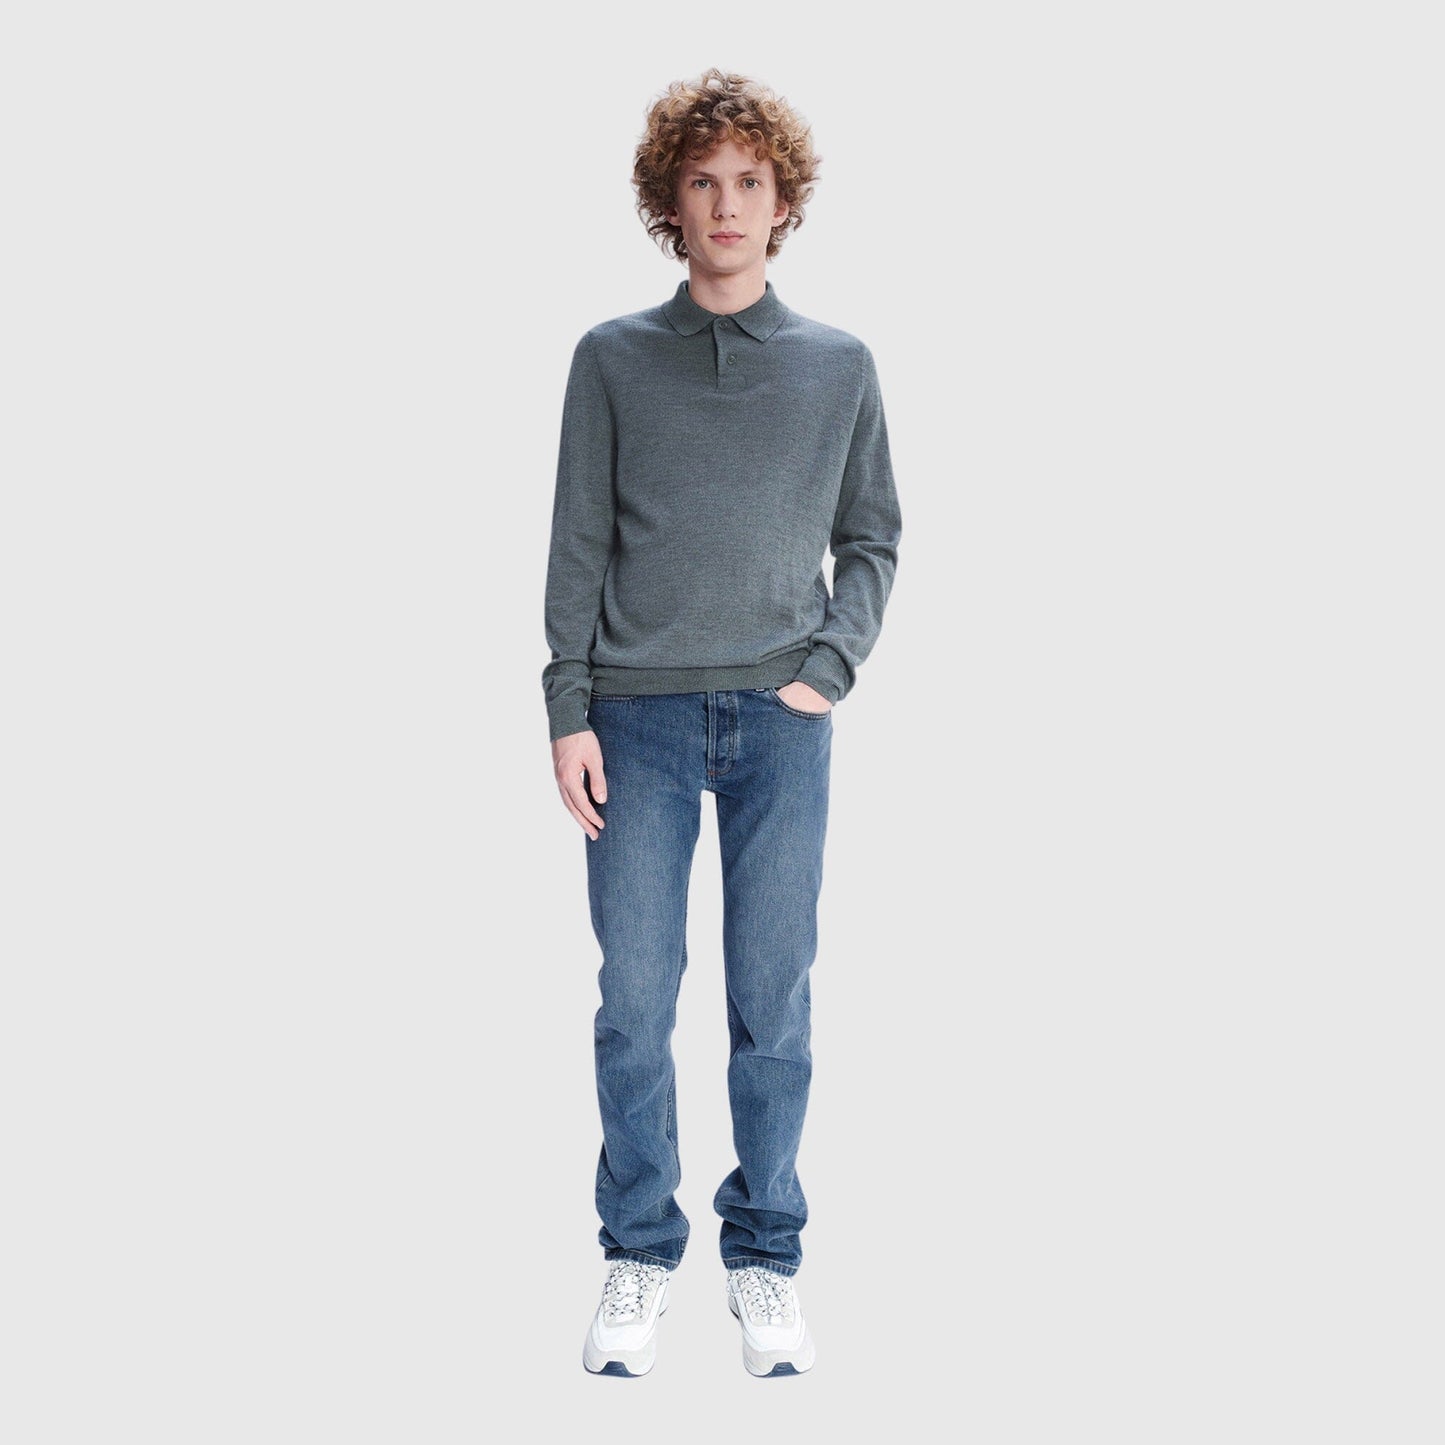 A.P.C. Jerry Polo - Heathered Anthracite T-Shirt A.P.C. 